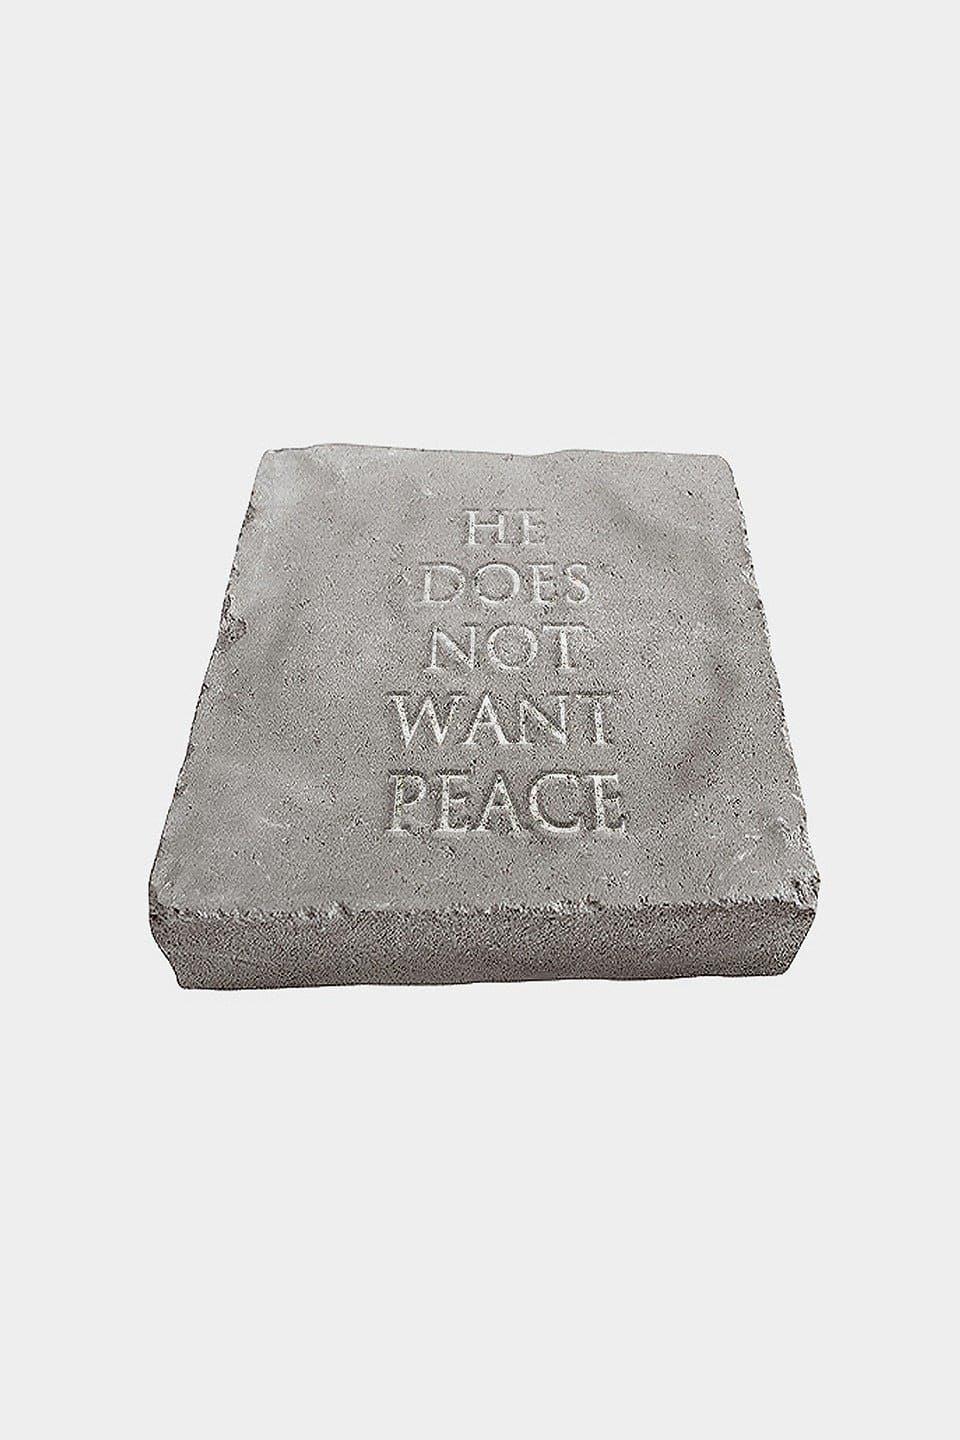 He Does Not Want Peace poster